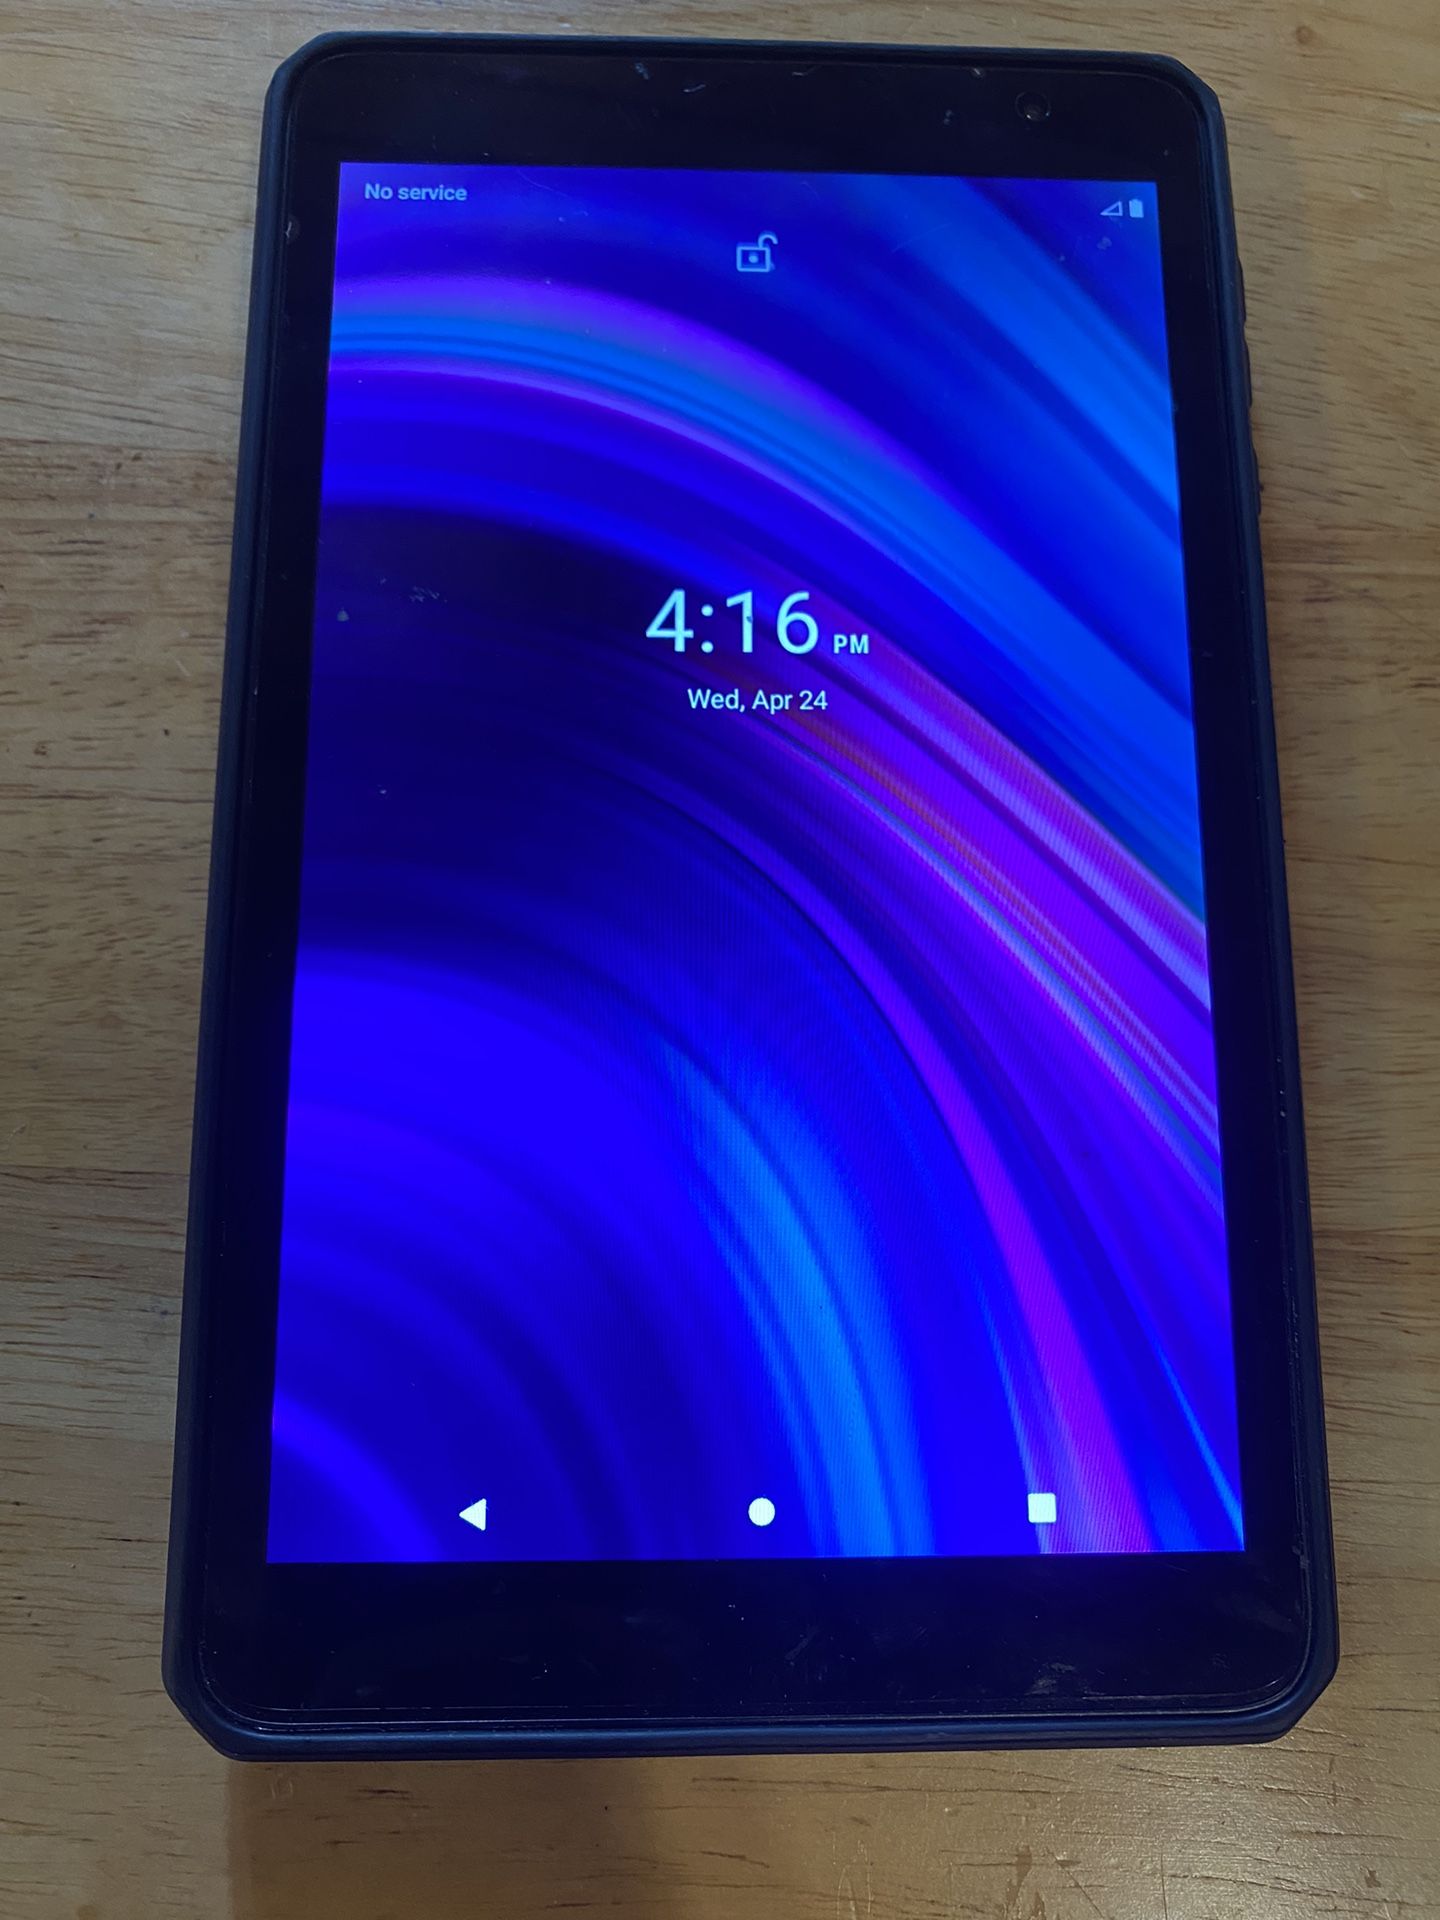 Blu Tablet great condition PICK UP ONLY $30